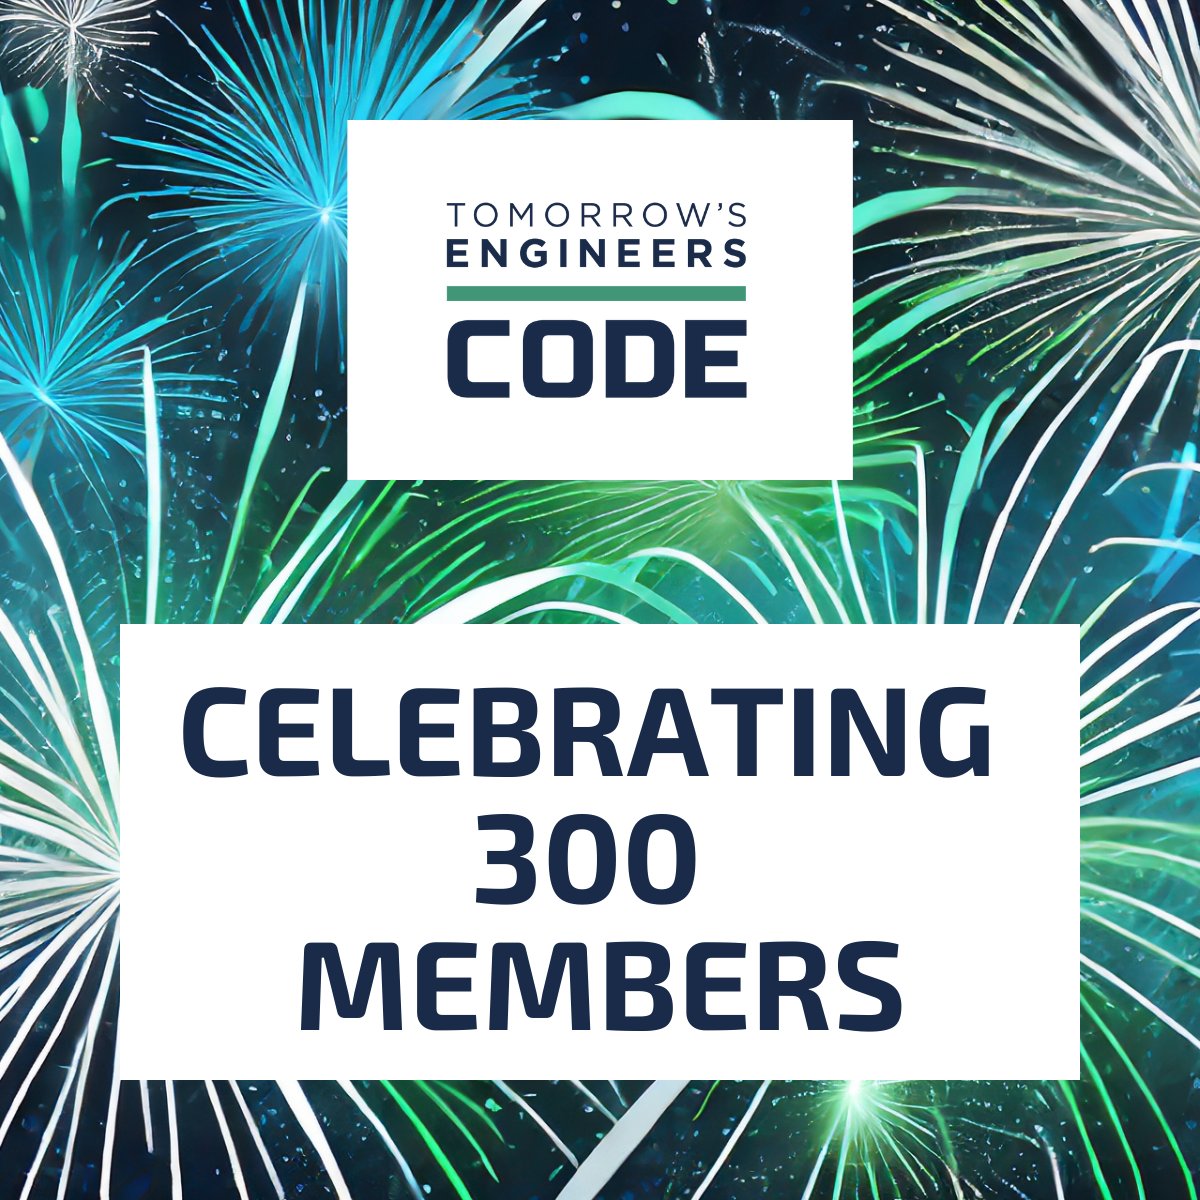 The Tomorrow's Engineers Code is 300 members strong! 

@TheTECode has reached an incredible milestone and now has 300 members. The Code community is united to inspire a diverse engineering and technology workforce.

Find out more and join the community: bit.ly/3S6nB1Z